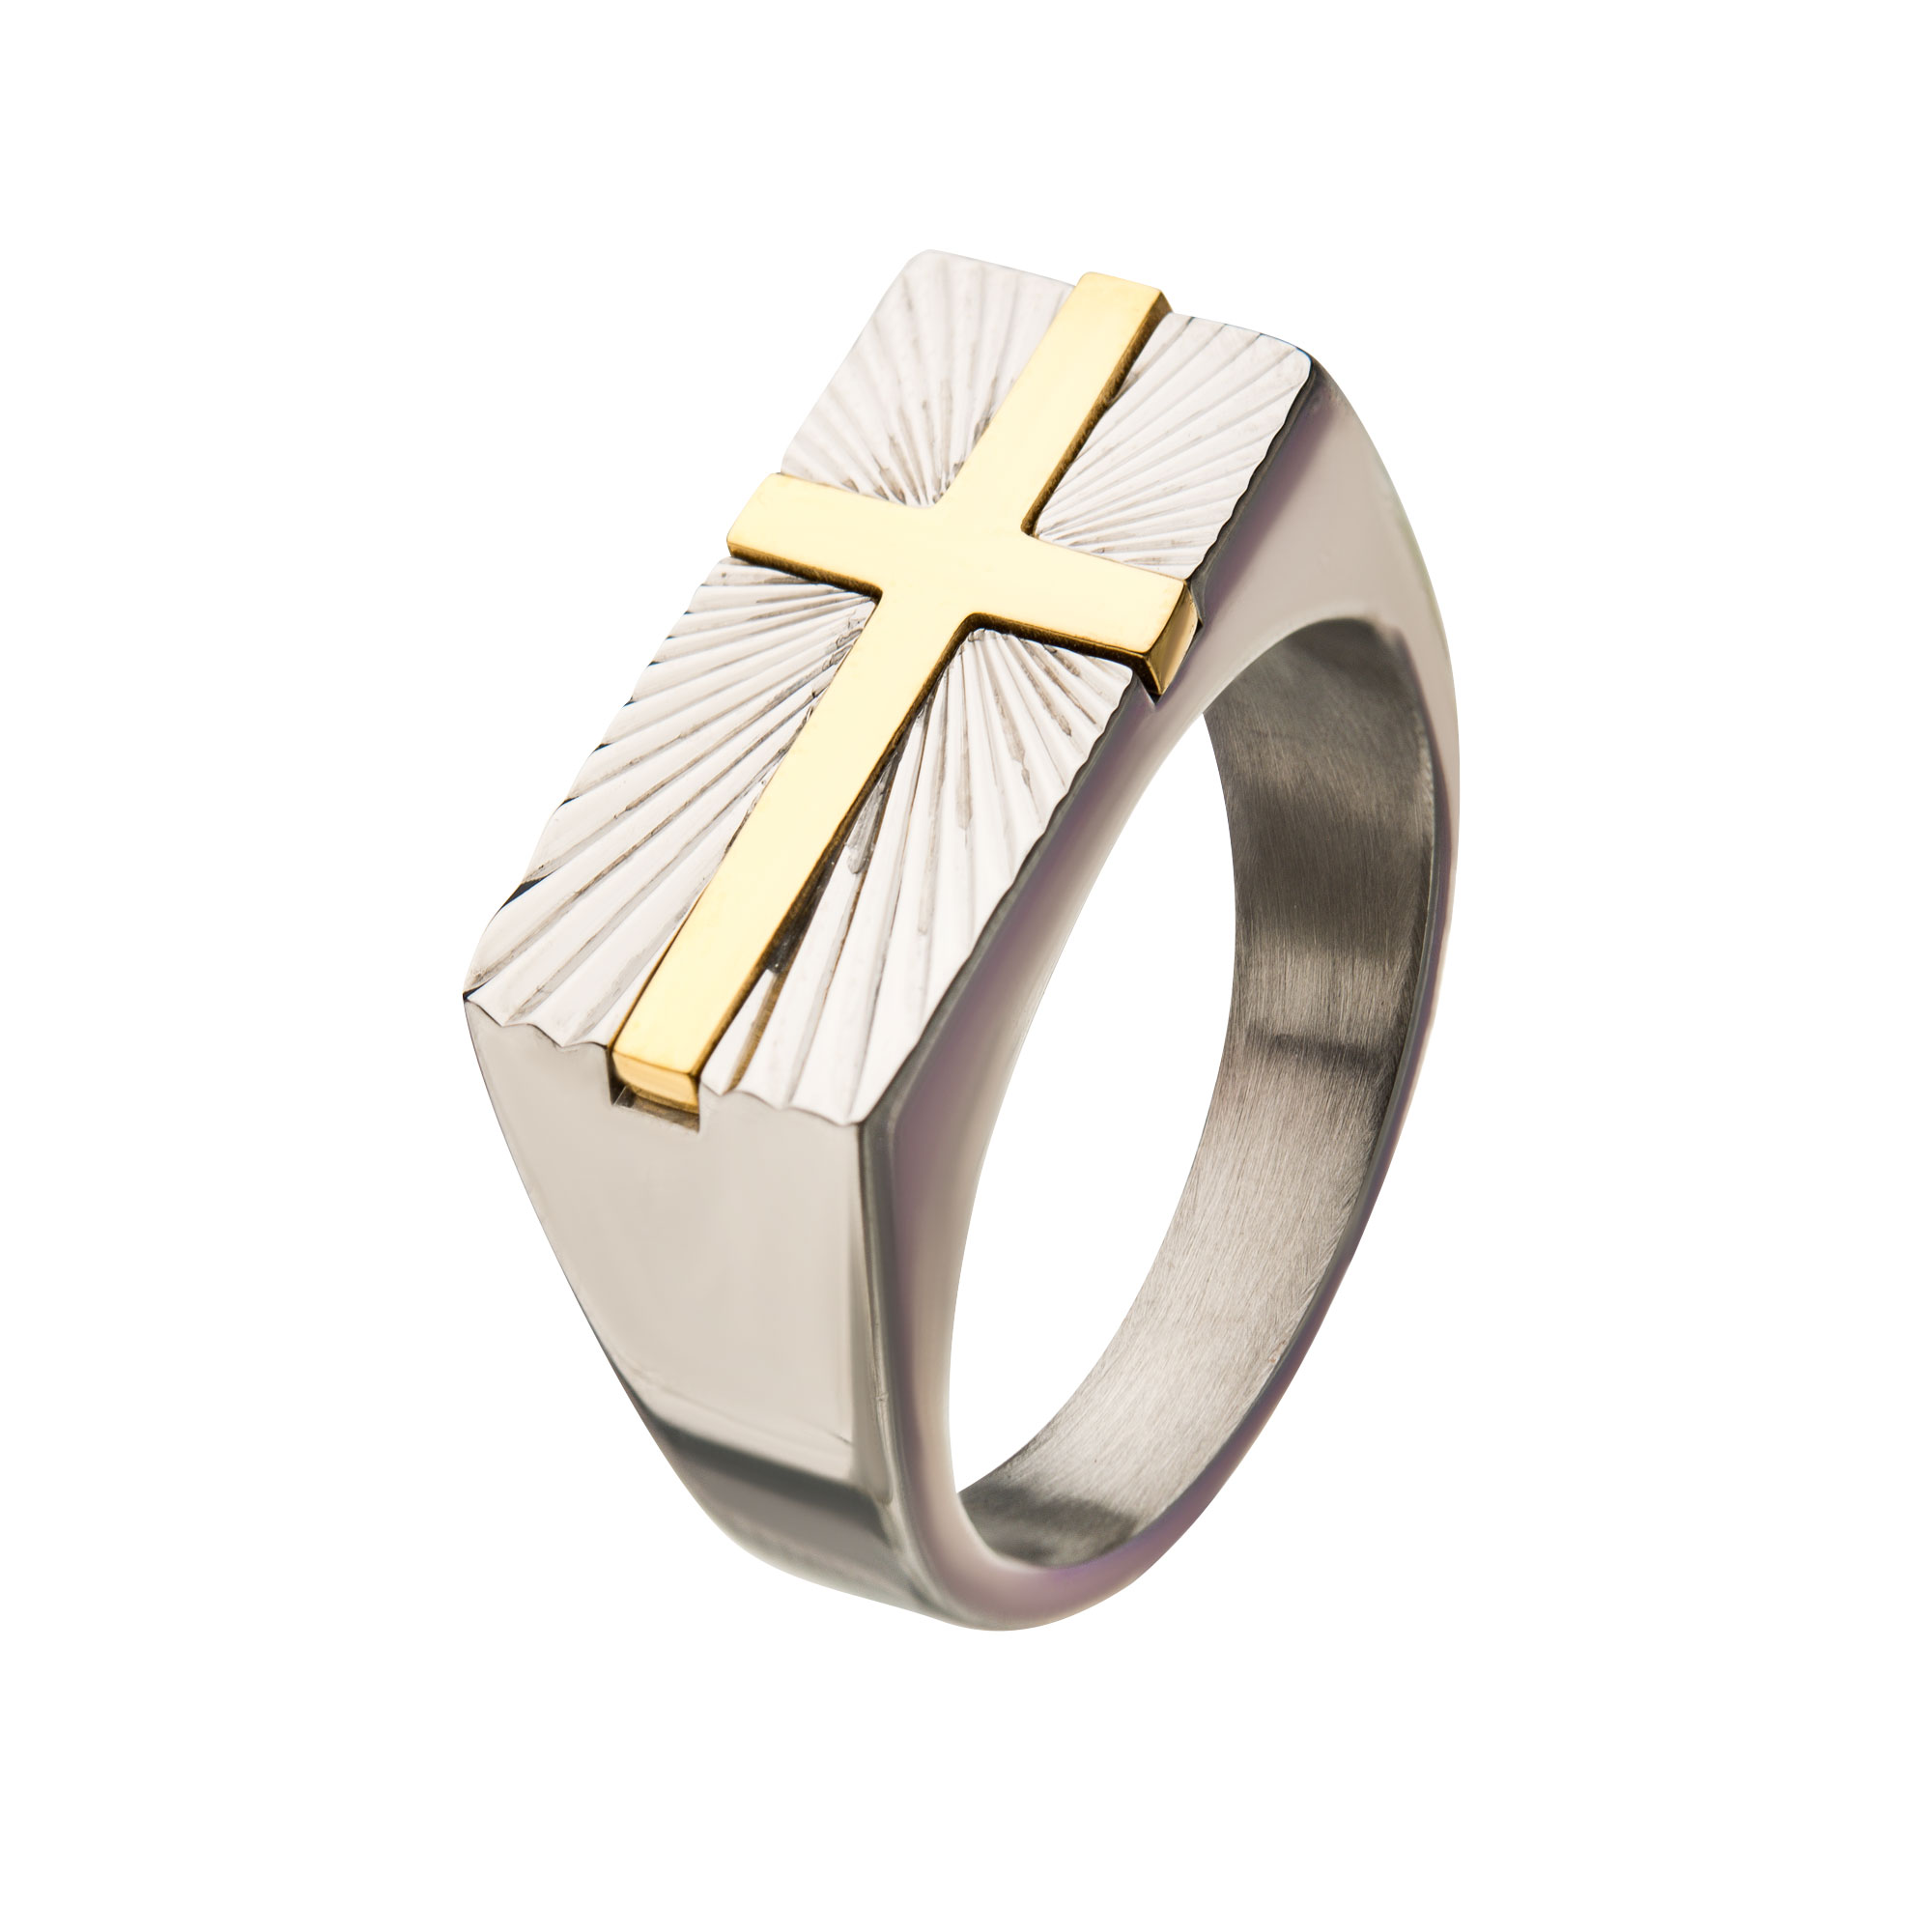 Stainless Steel with  Gold Plated Transfiguration Cross Ring Ken Walker Jewelers Gig Harbor, WA